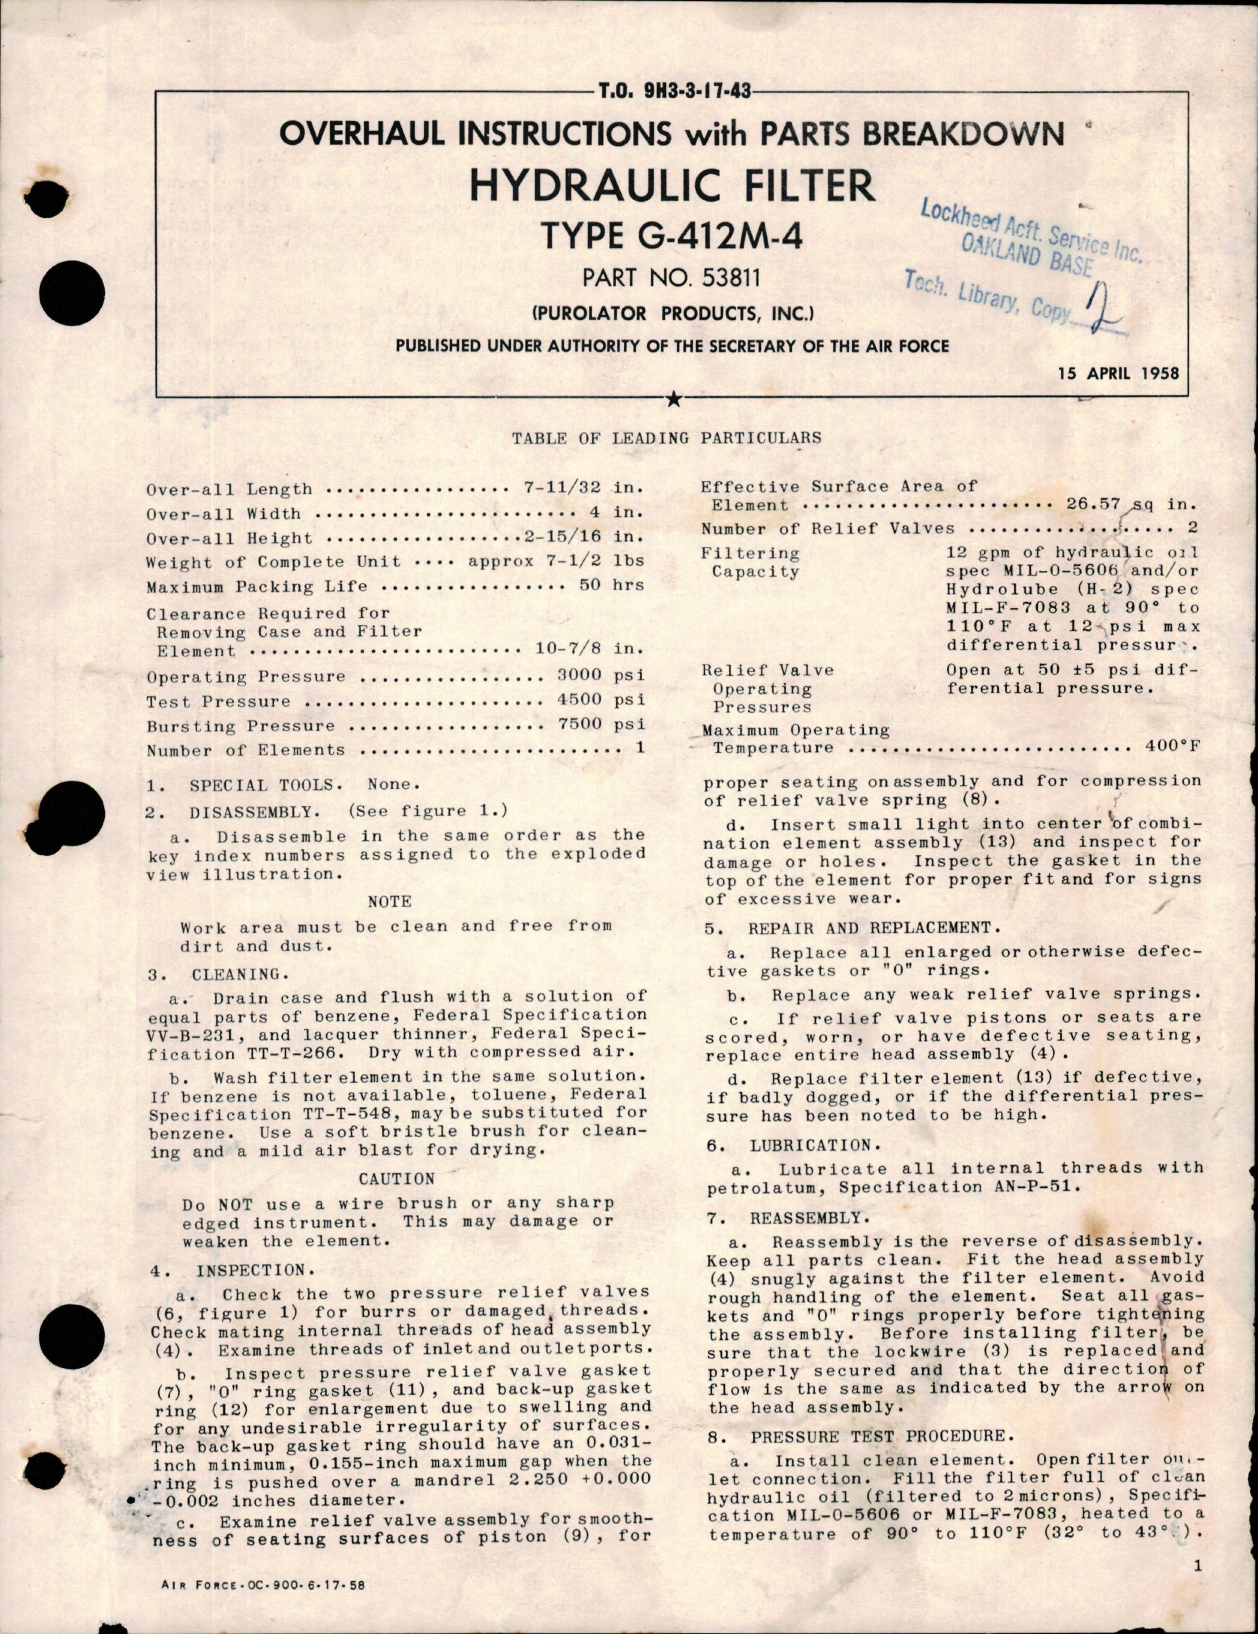 Sample page 1 from AirCorps Library document: Overhaul Instructions with Parts Breakdown for Hydraulic Filter - Type G-412M-4 - Part 53811